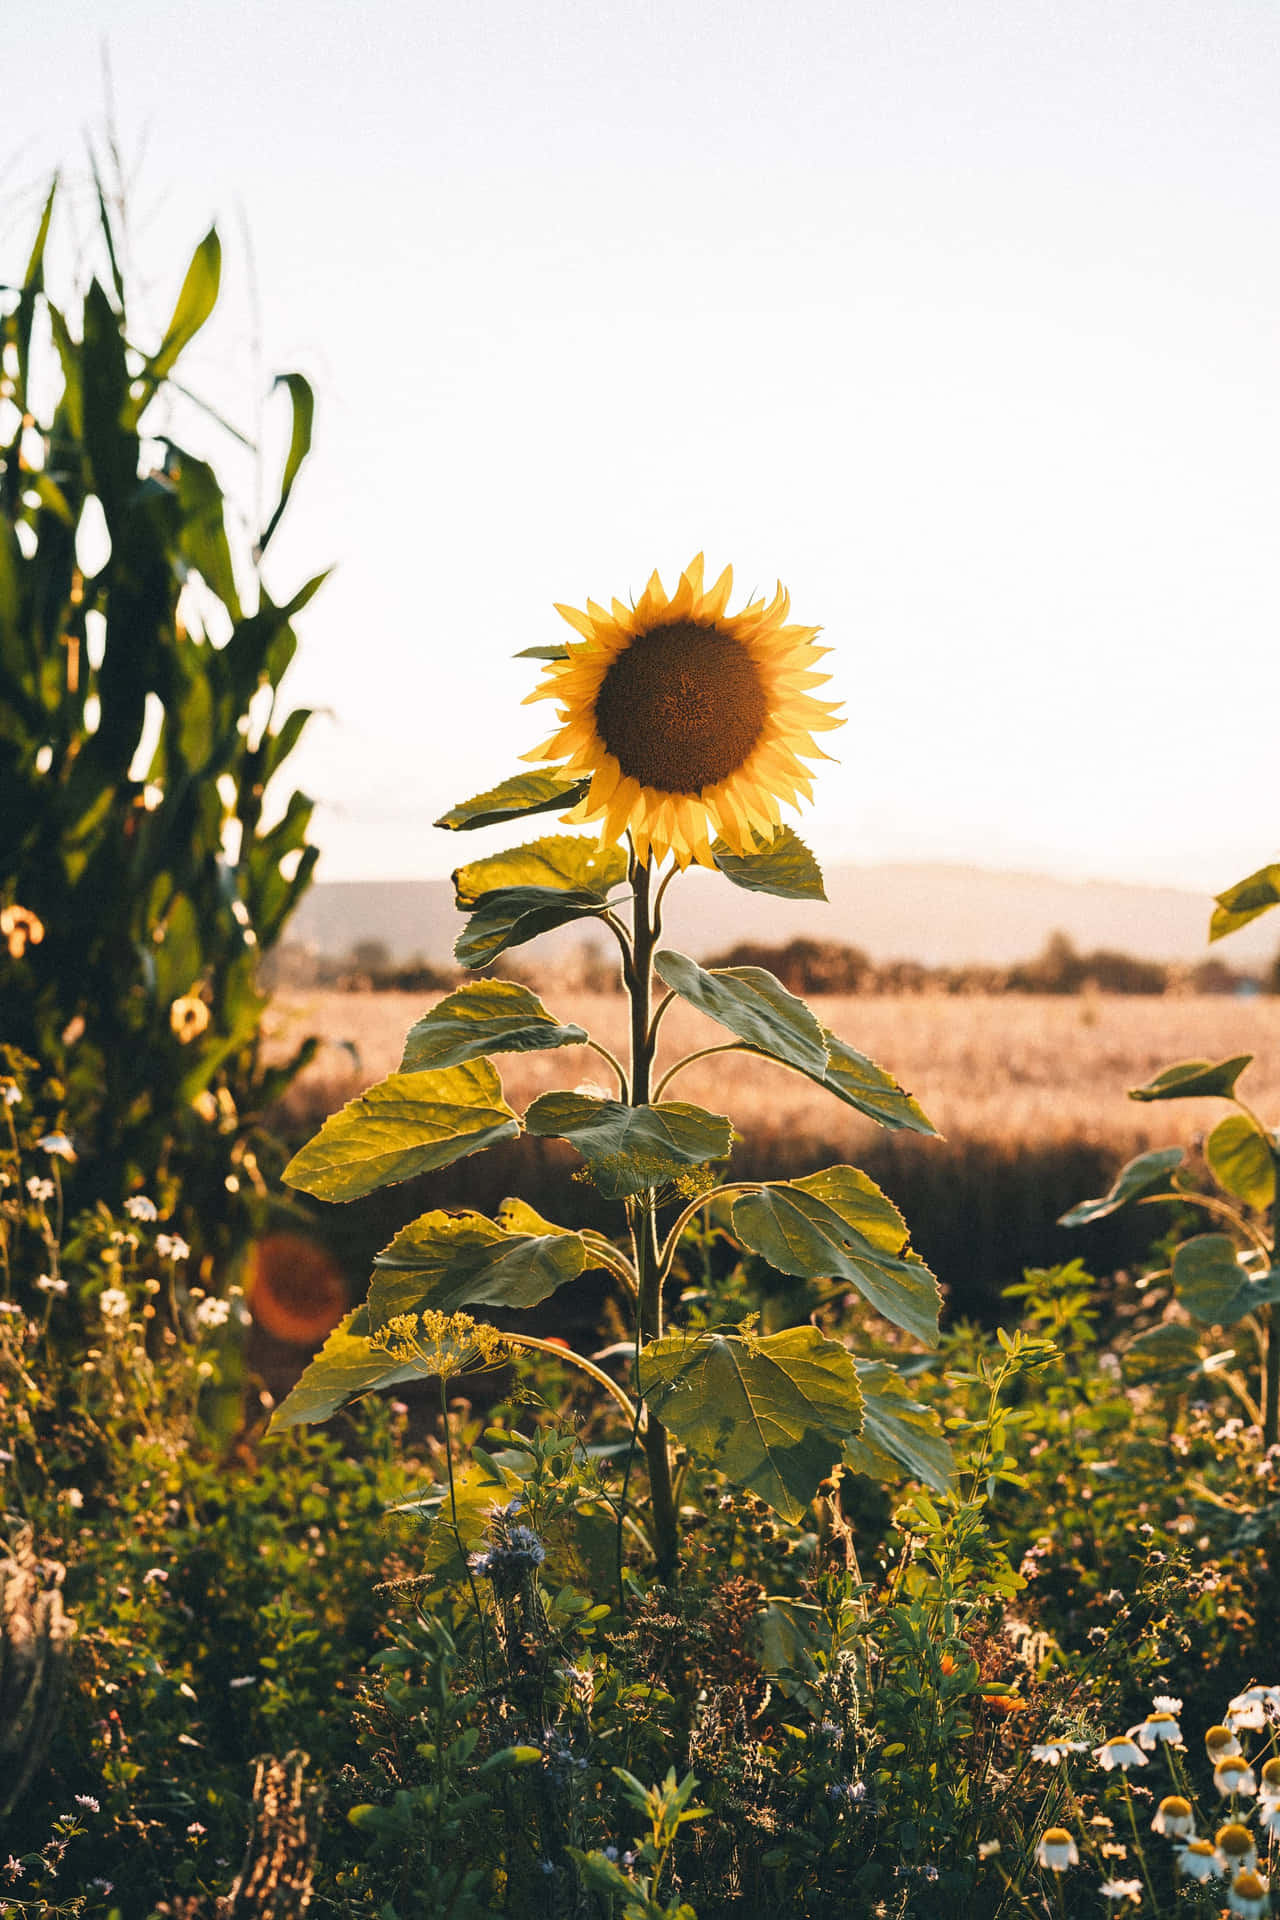 Beauty and nature combine in this stunning sunflower aesthetic iPhone wallpaper. Wallpaper